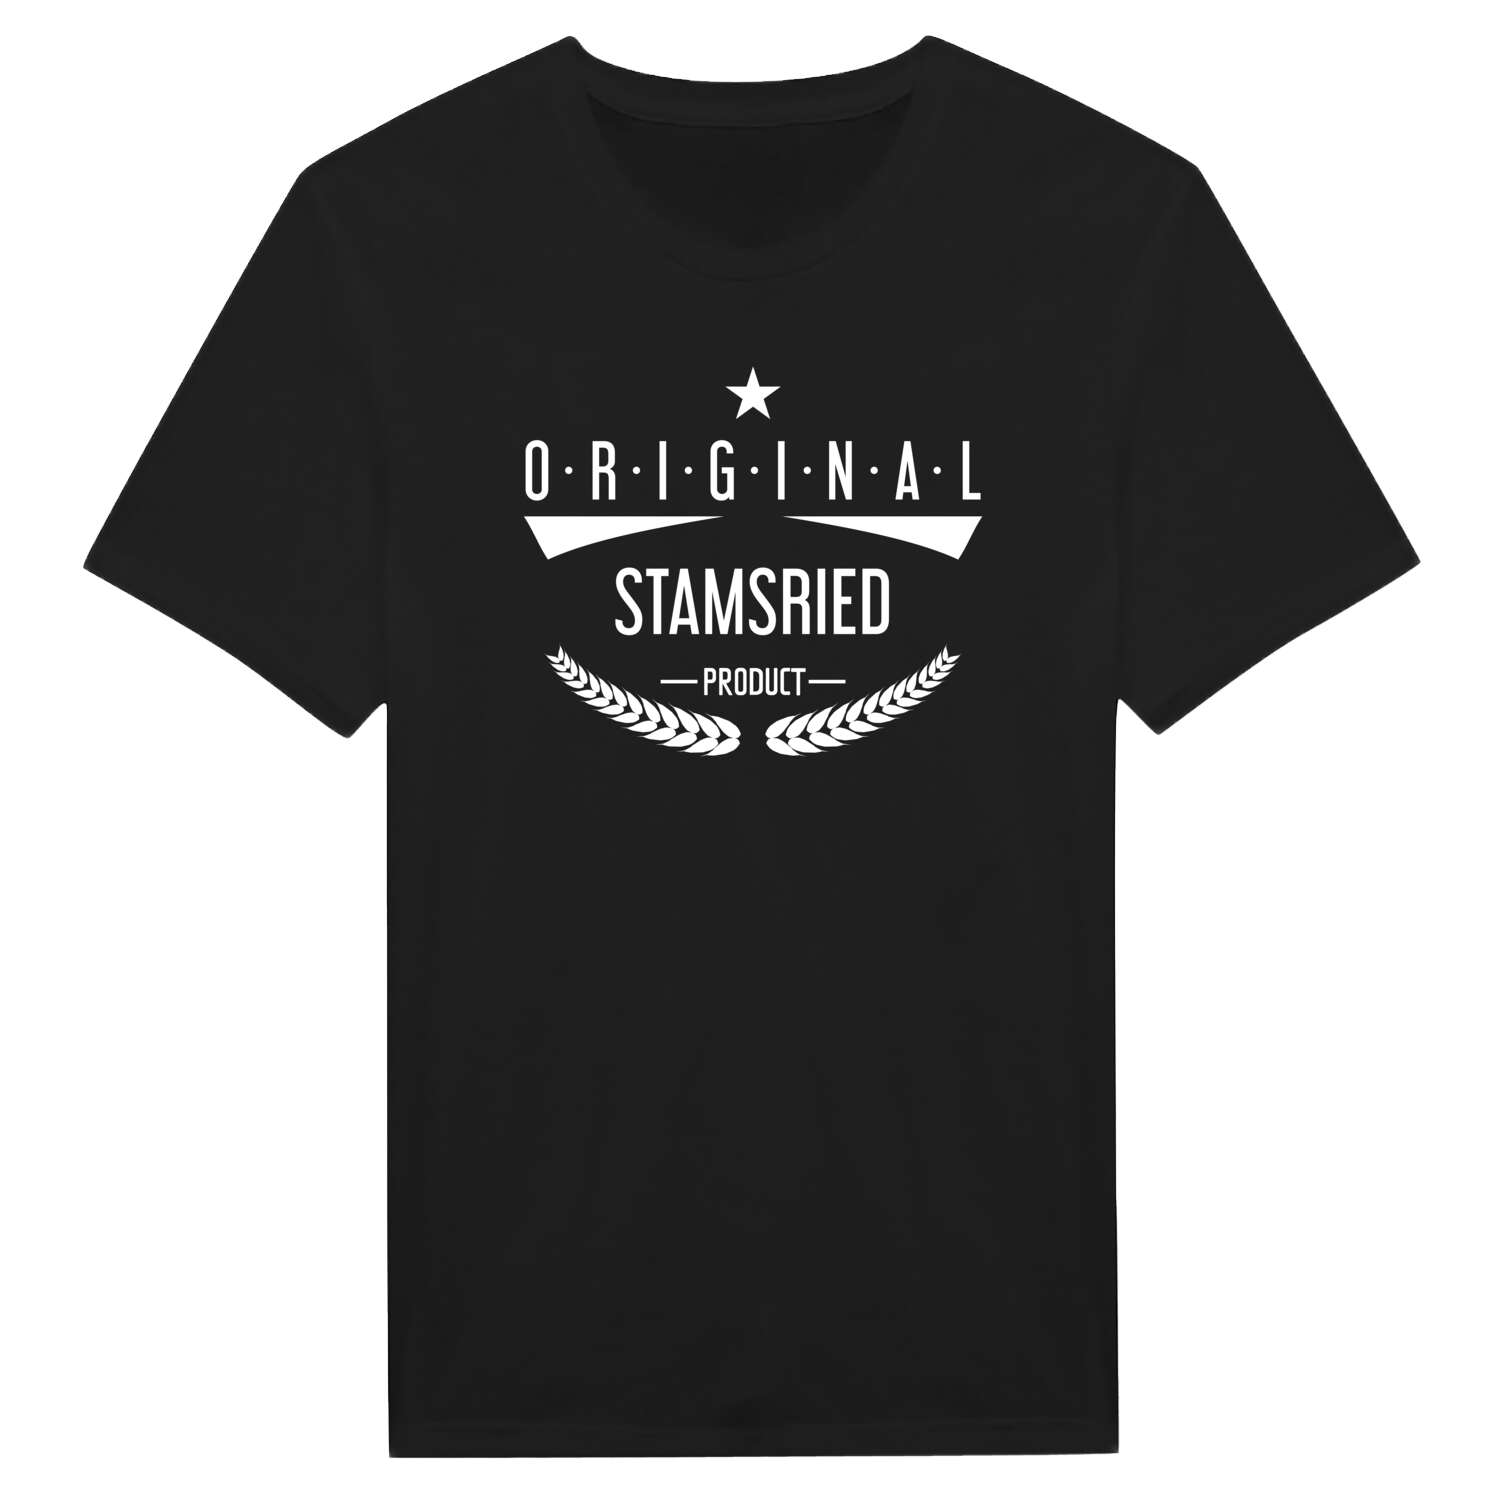 Stamsried T-Shirt »Original Product«